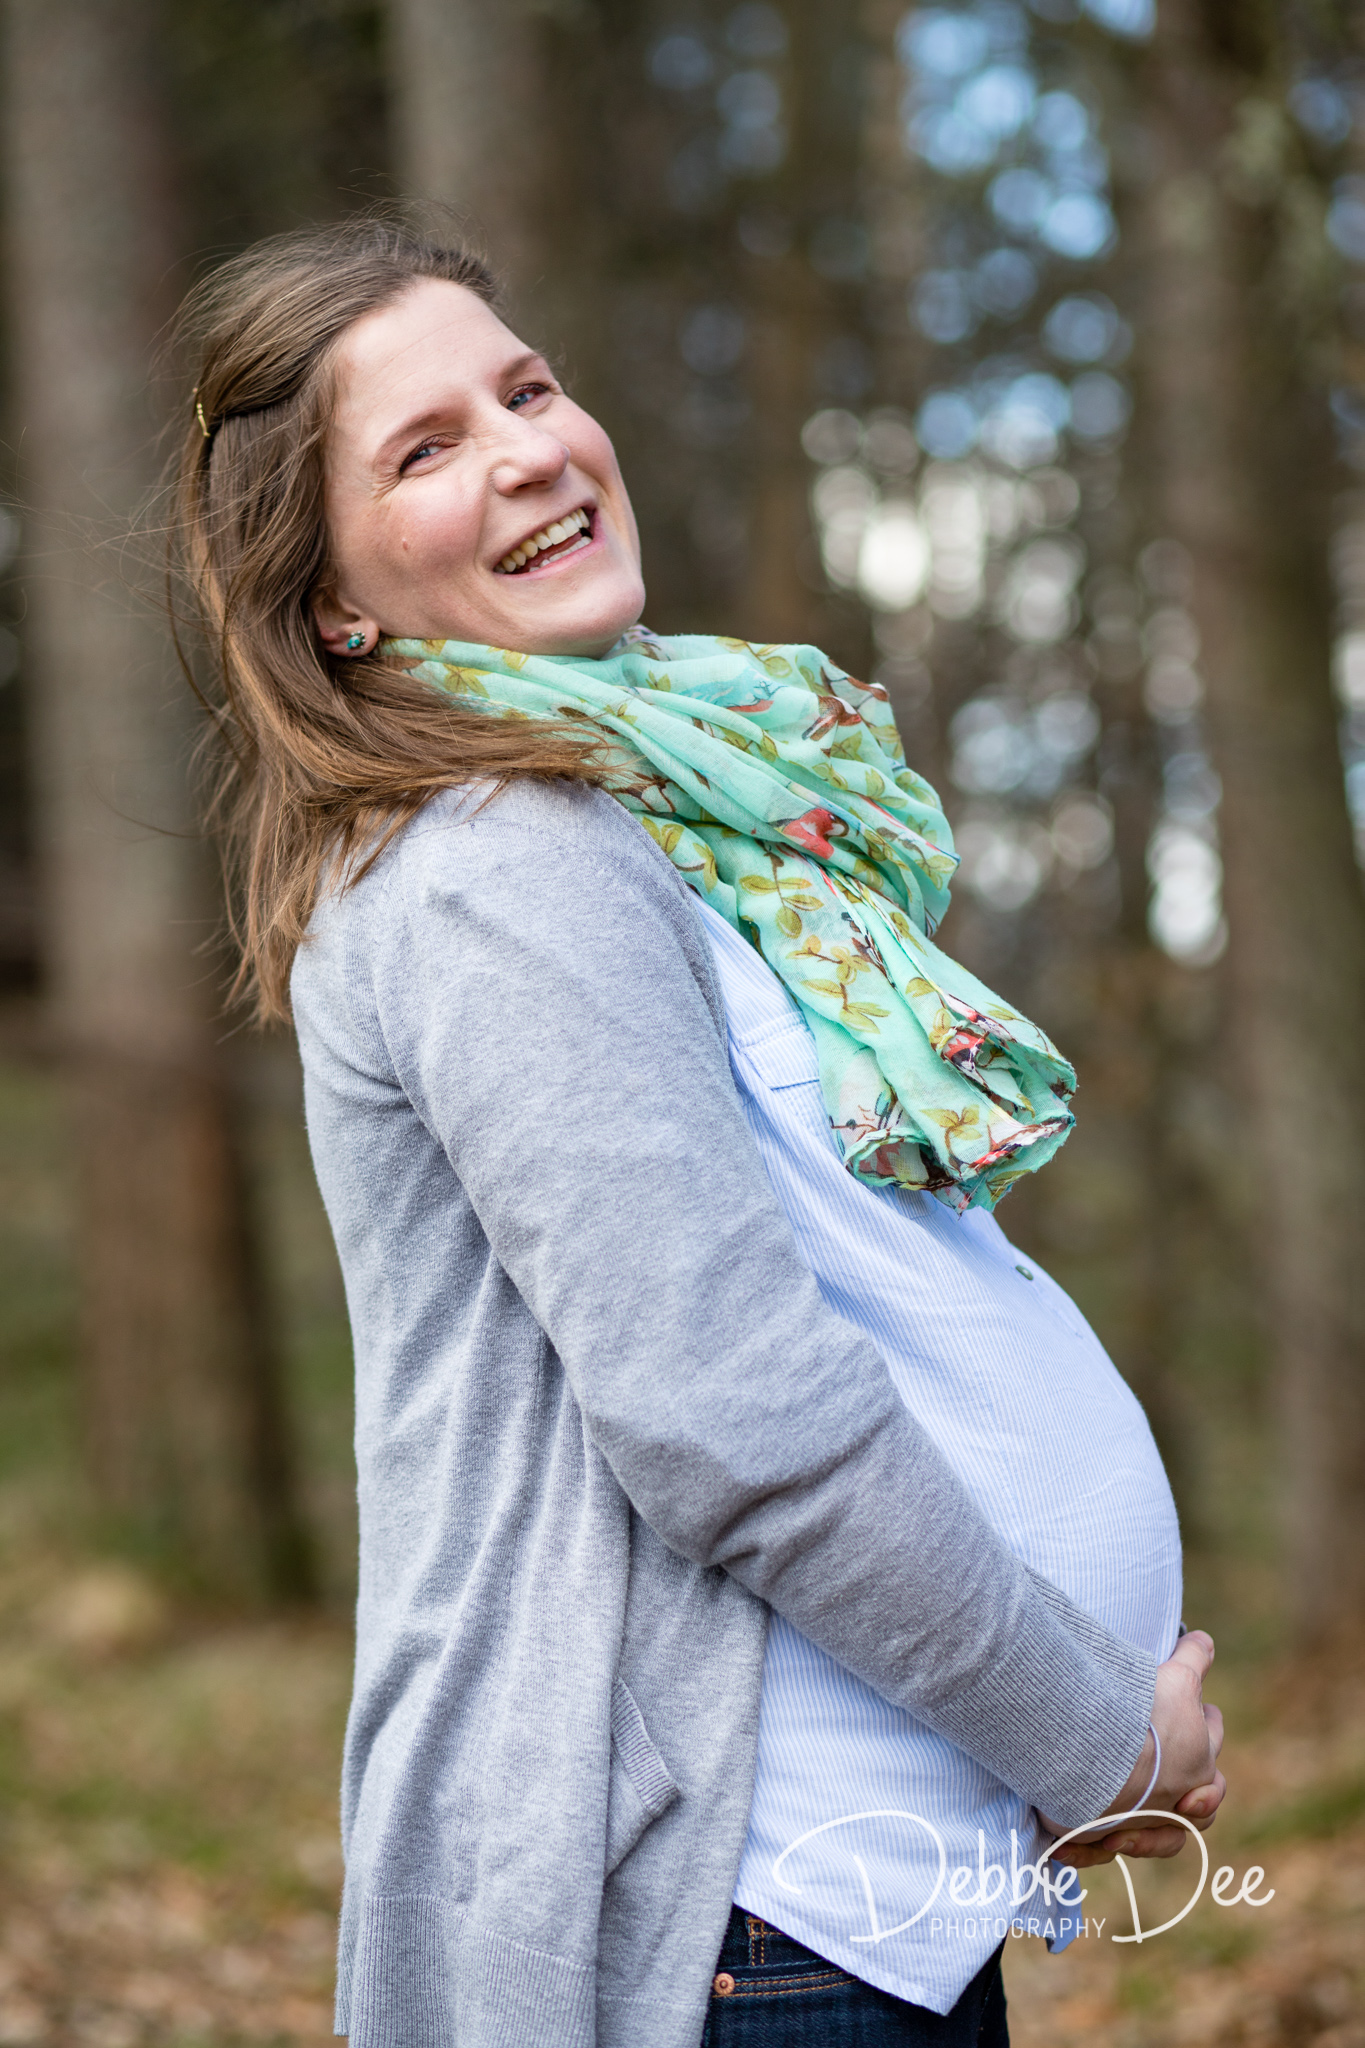 Aberdeenshire Maternity Photography Session - Make-up by Tiffany Dawson Make-Up Artistry - pregnant mum smiling to camera